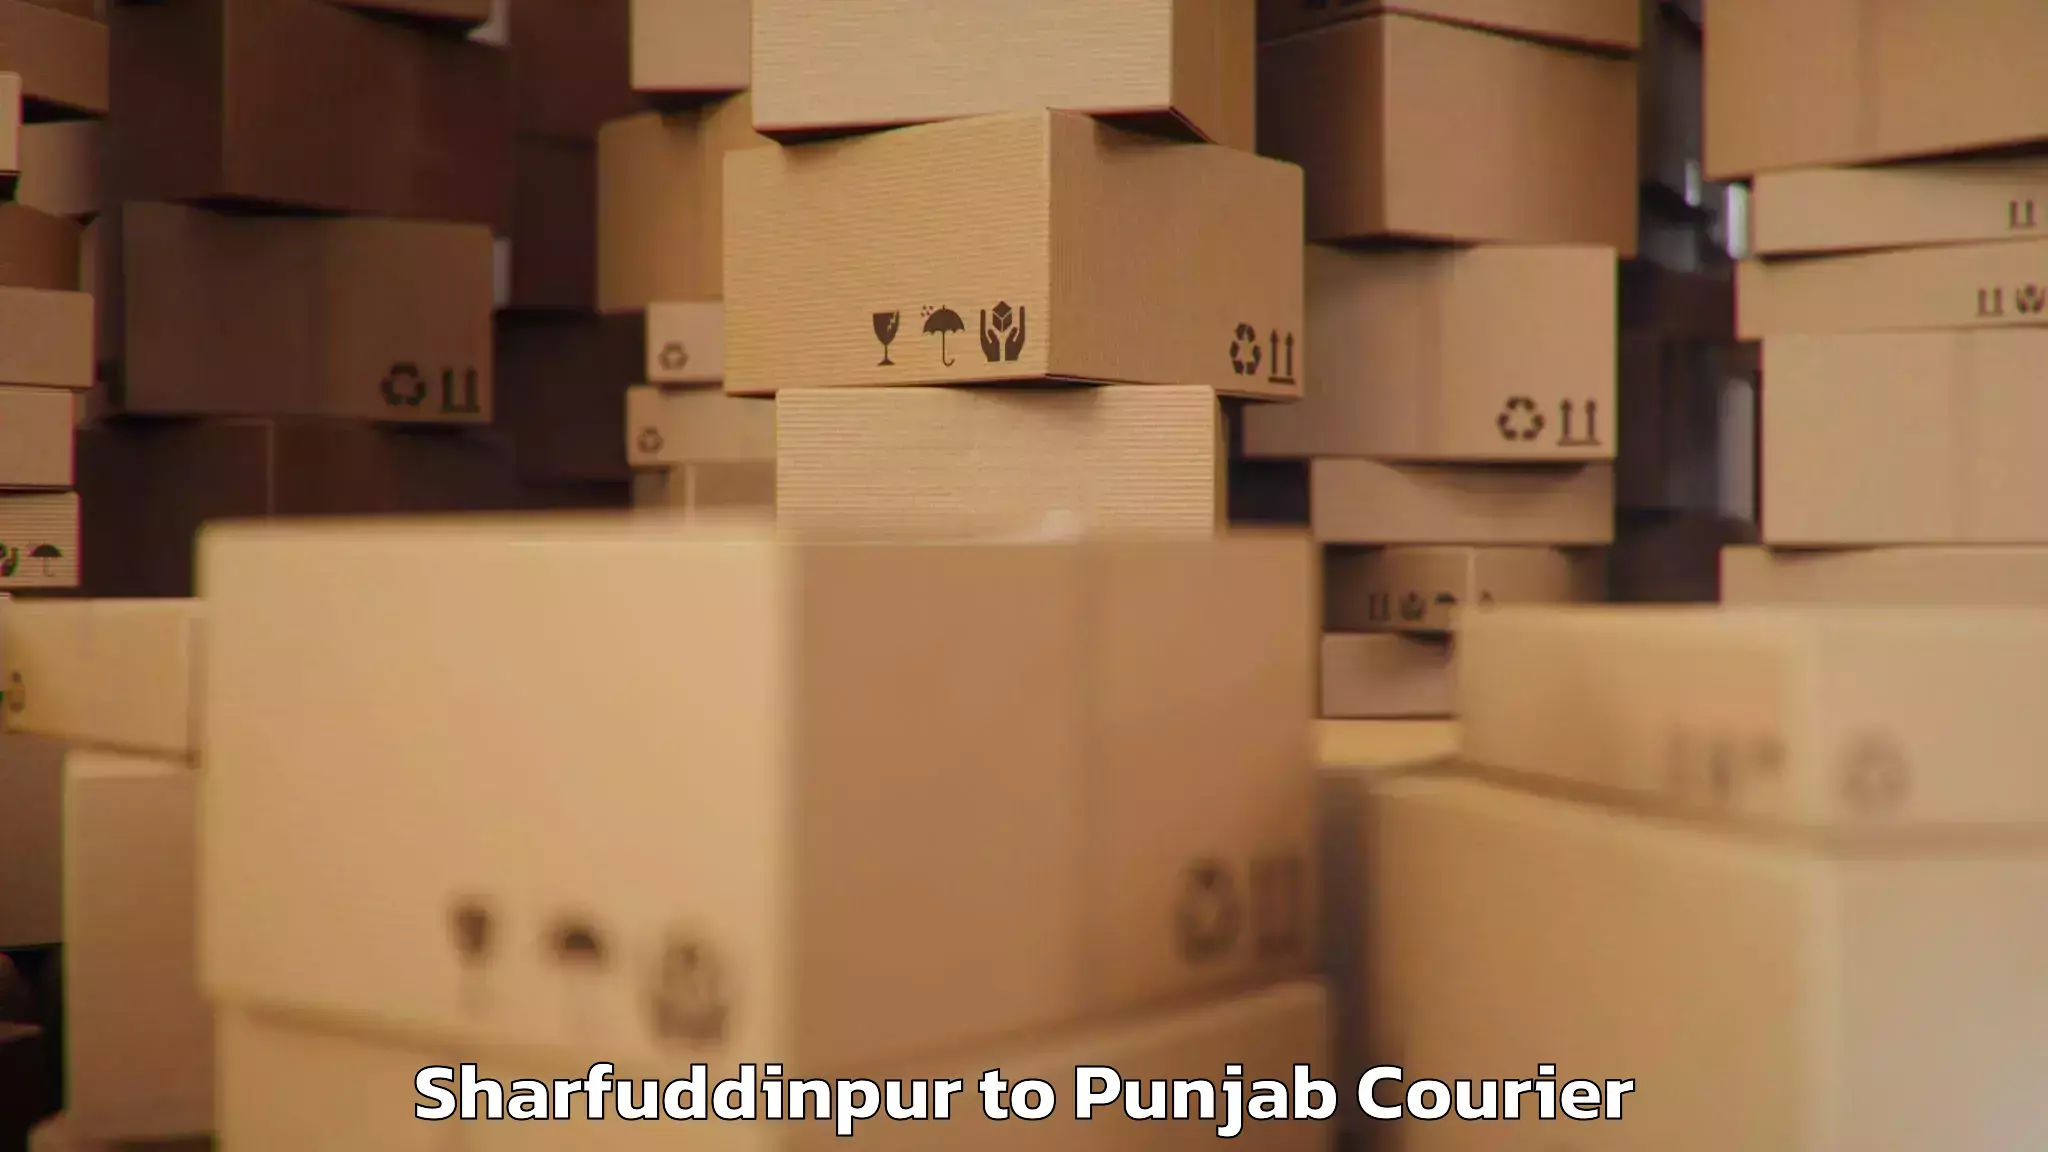 Baggage transport services Sharfuddinpur to Thapar Institute of Engineering and Technology Patiala